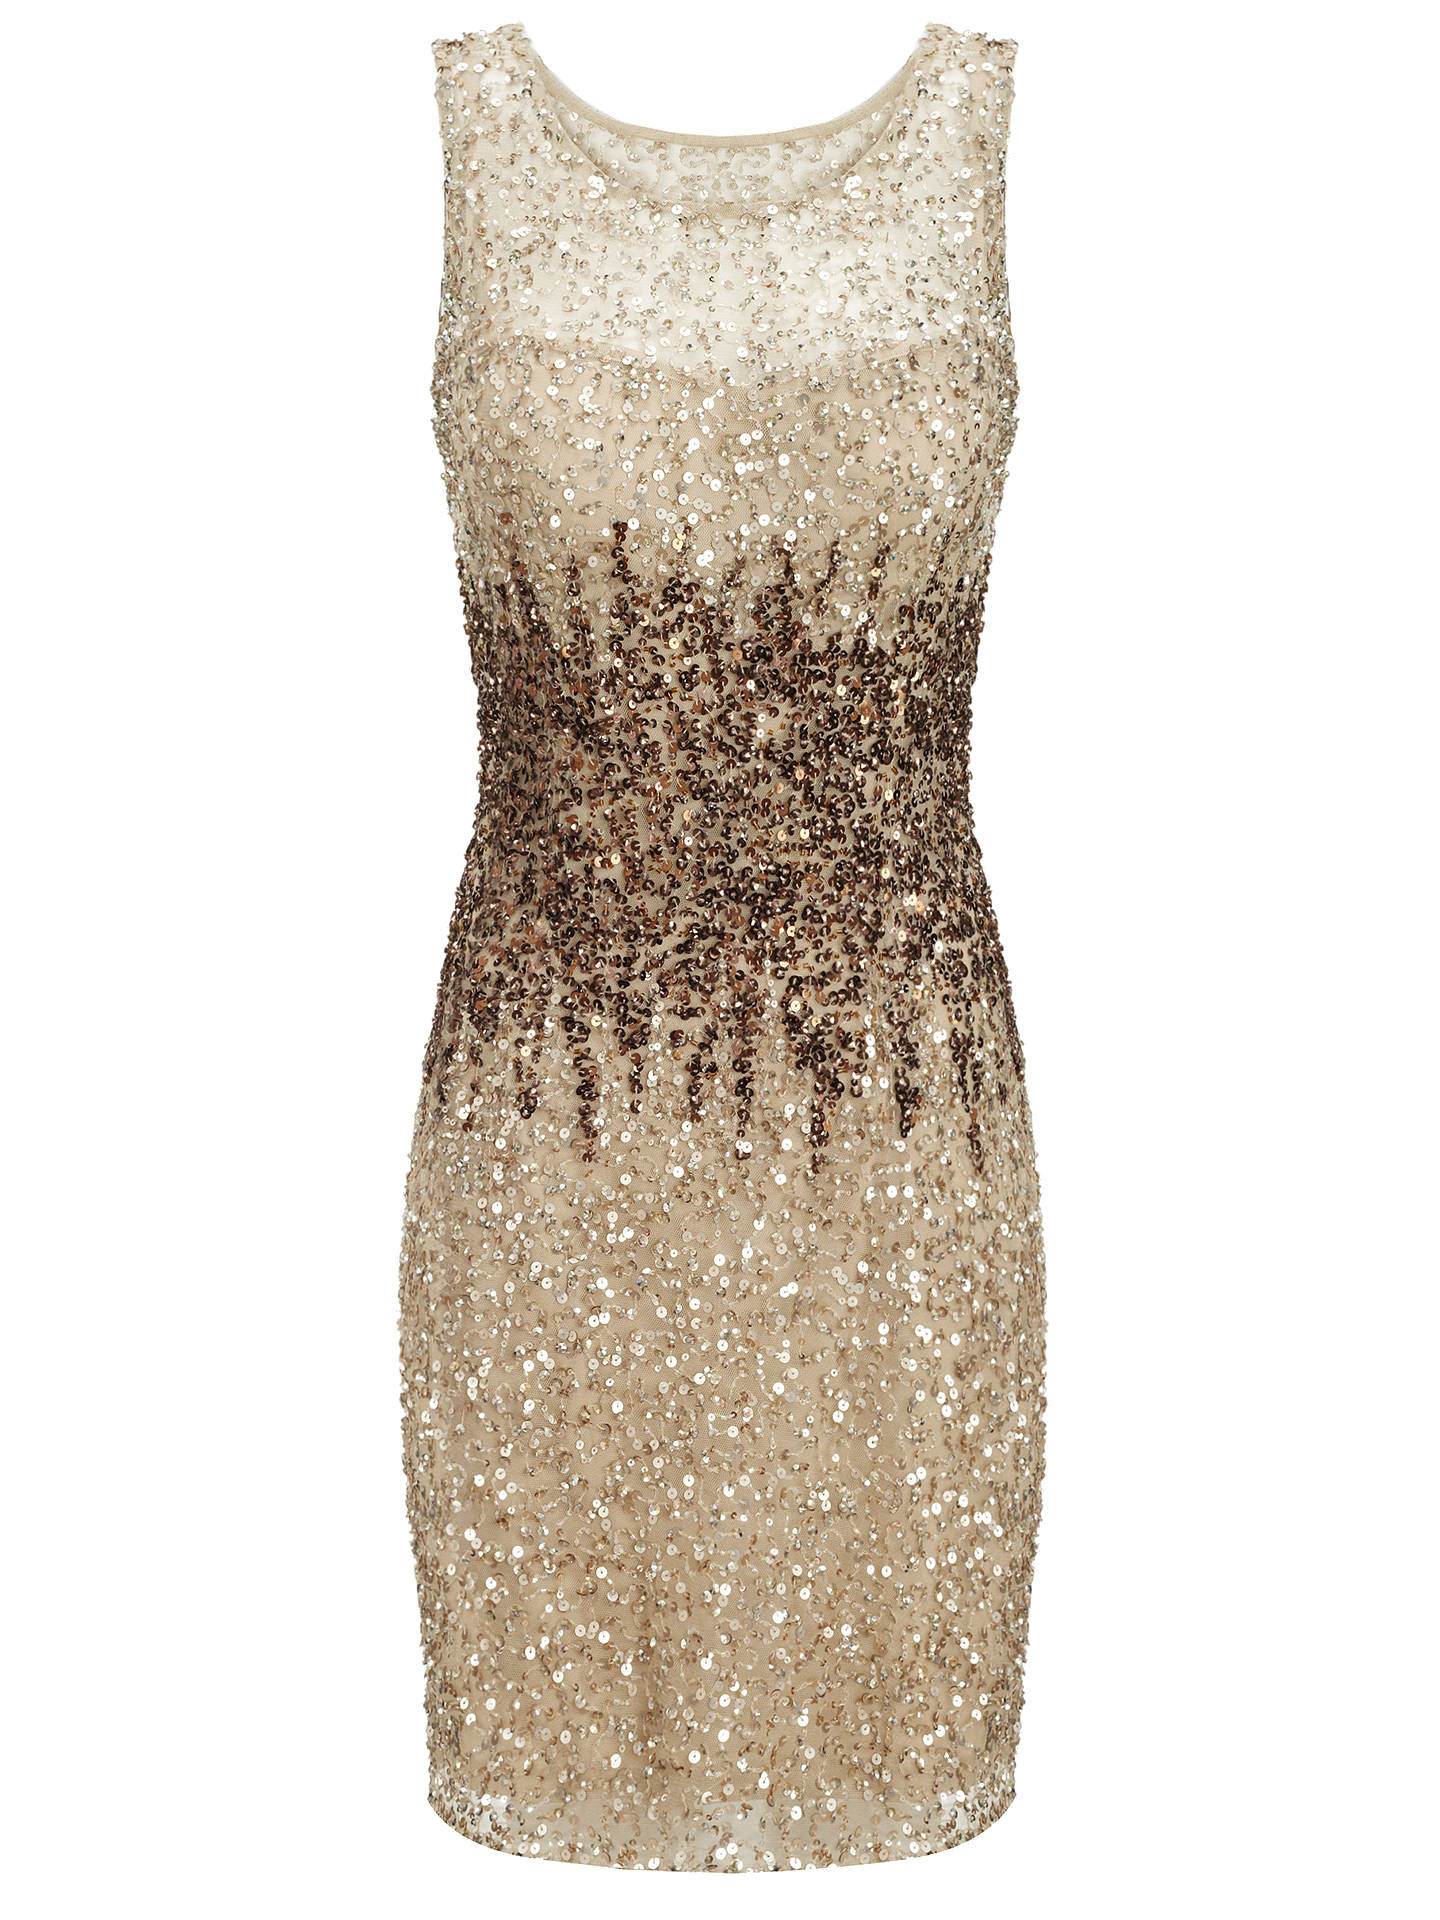 Adrianna Papell Short Bead Dress, Champagne at John Lewis & Partners